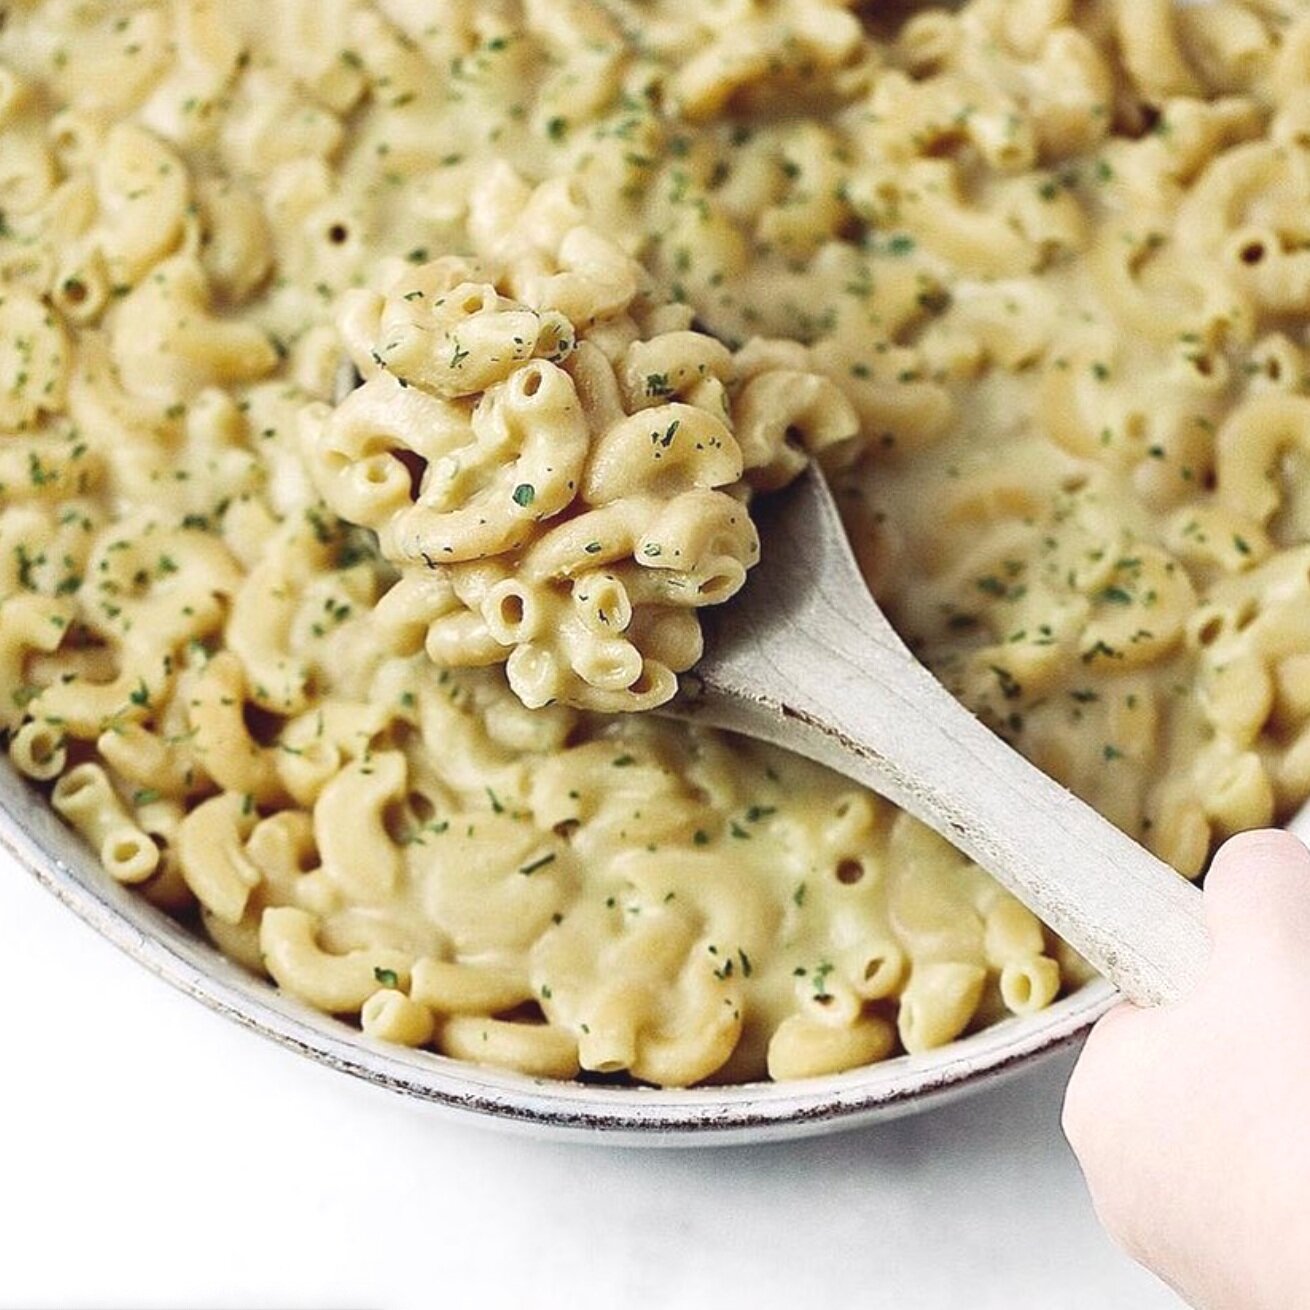   Have you or a loved one suffered from mac ‘n cheese deprivation? If so, you may be entitled to a gooey vegan alternative. Don’t wait, visit @theplantpoweredparents today for recipe inspiration 🧀  